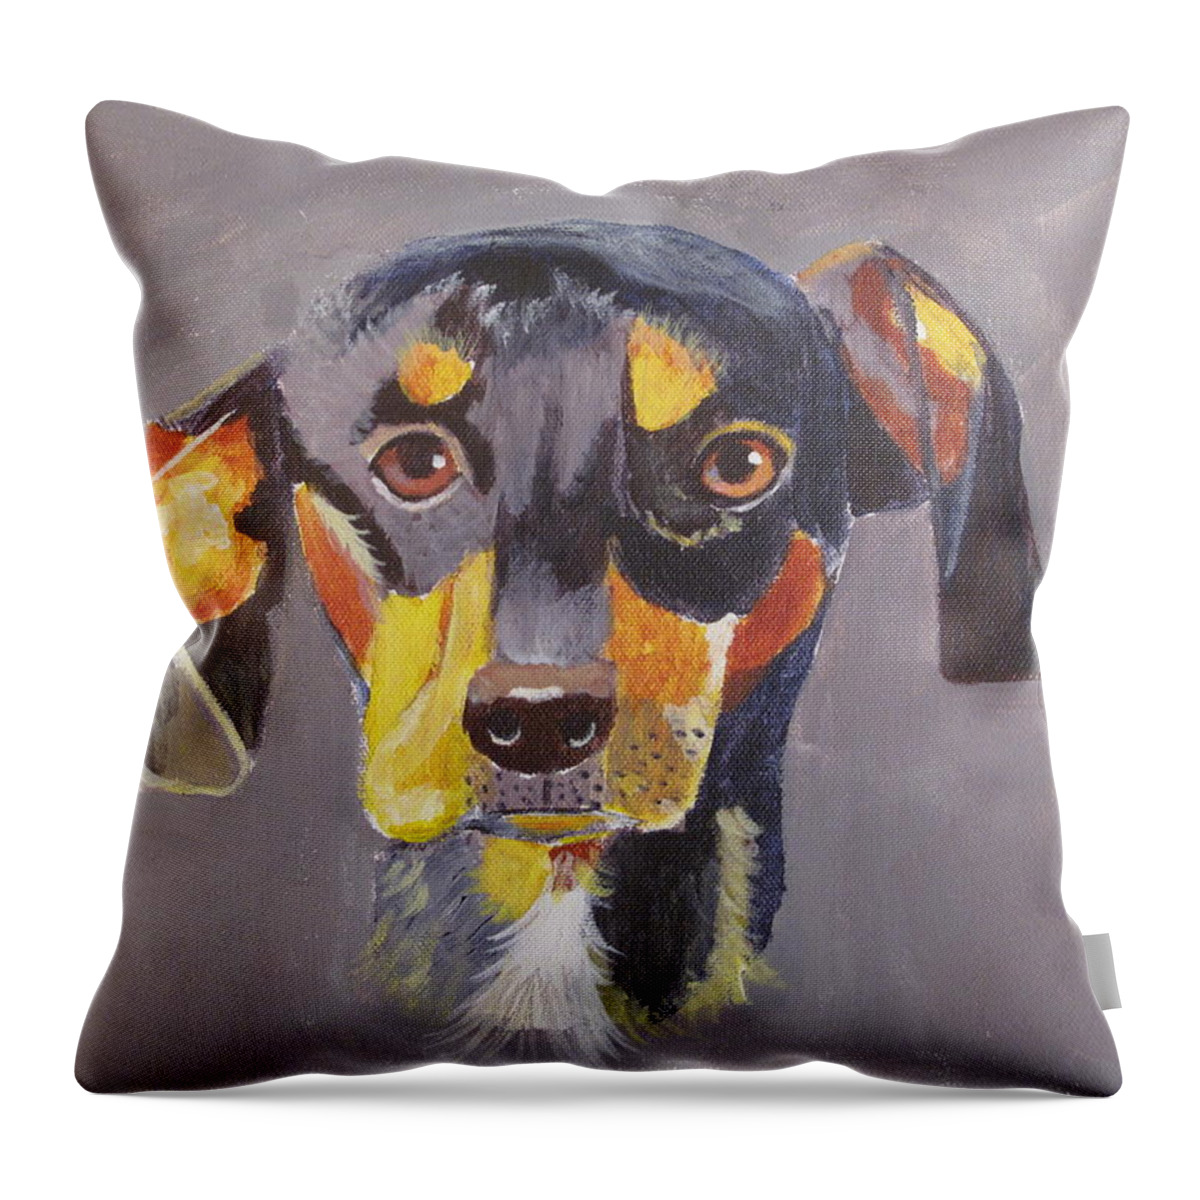 Pets Throw Pillow featuring the painting Dachshund by Kathie Camara